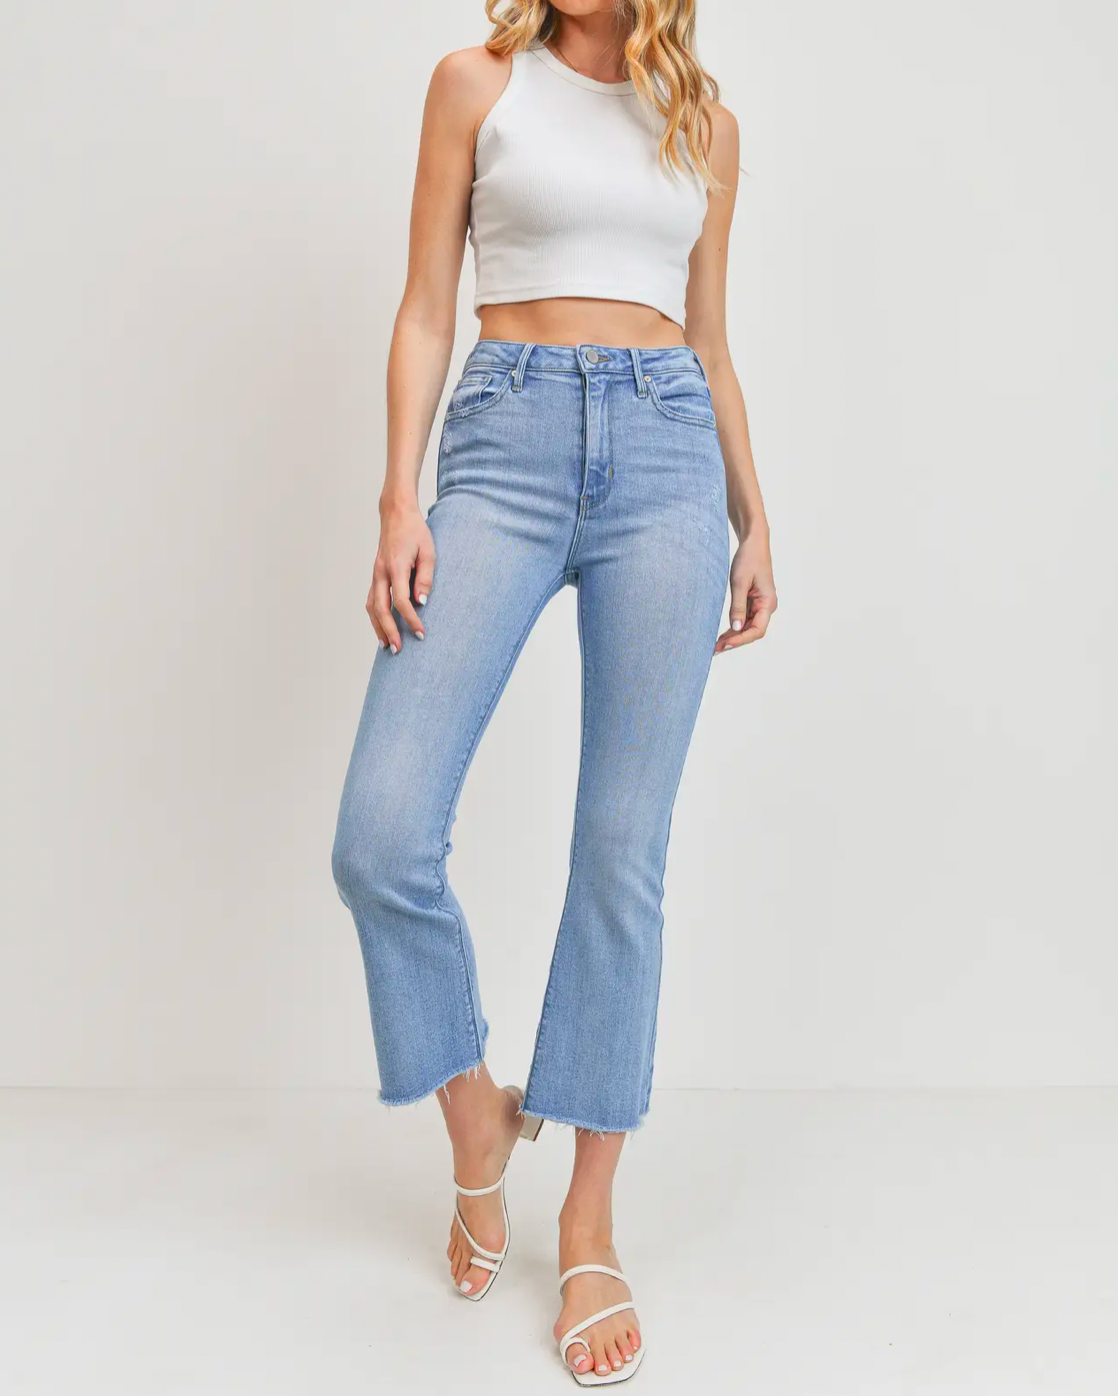 Model wearing Just black denim High Rise Tonal Crop Flare Light wash jeans wearing white crop tank top and white sandals on a white background